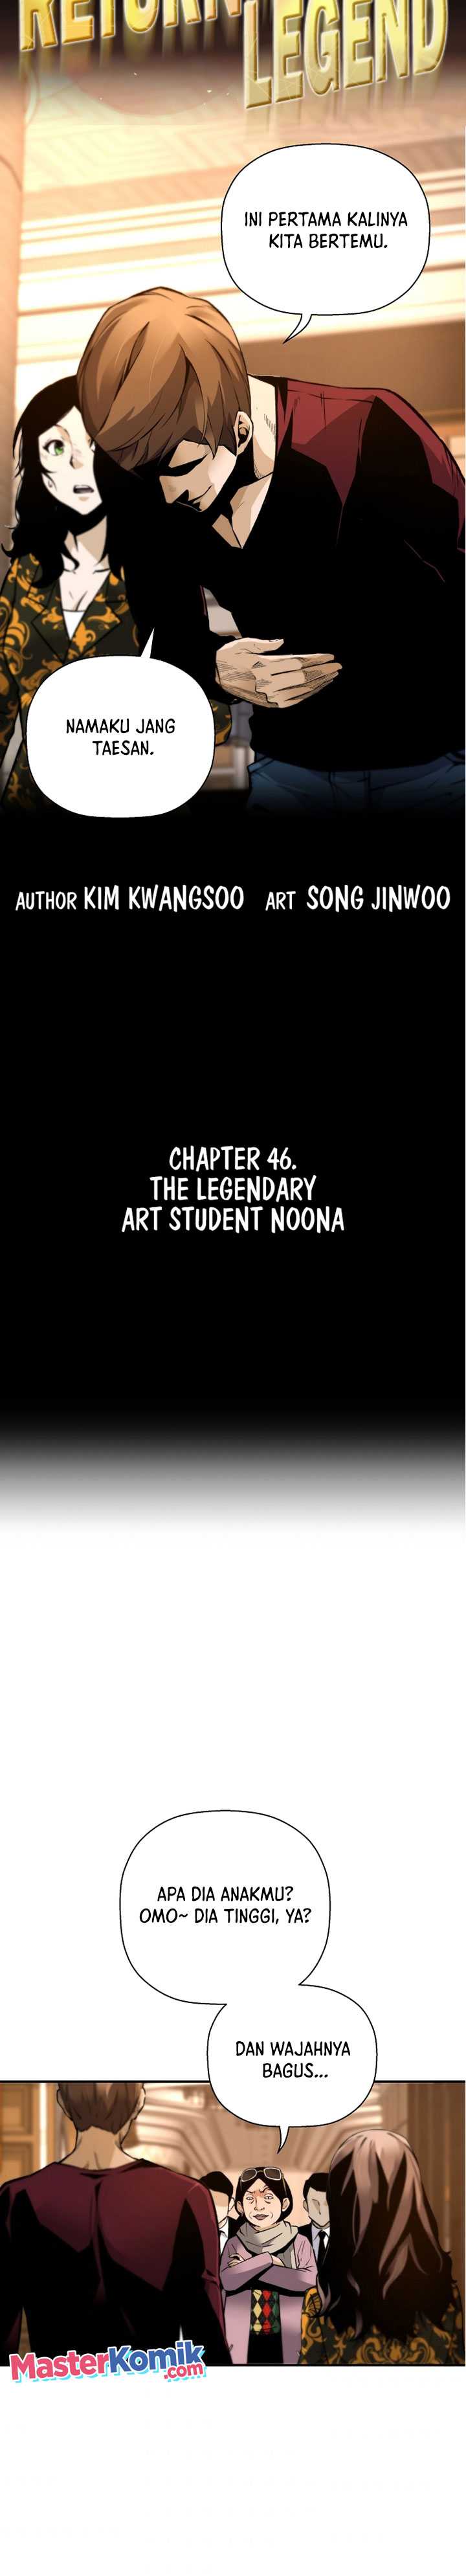 Return Of The Legend Chapter 46